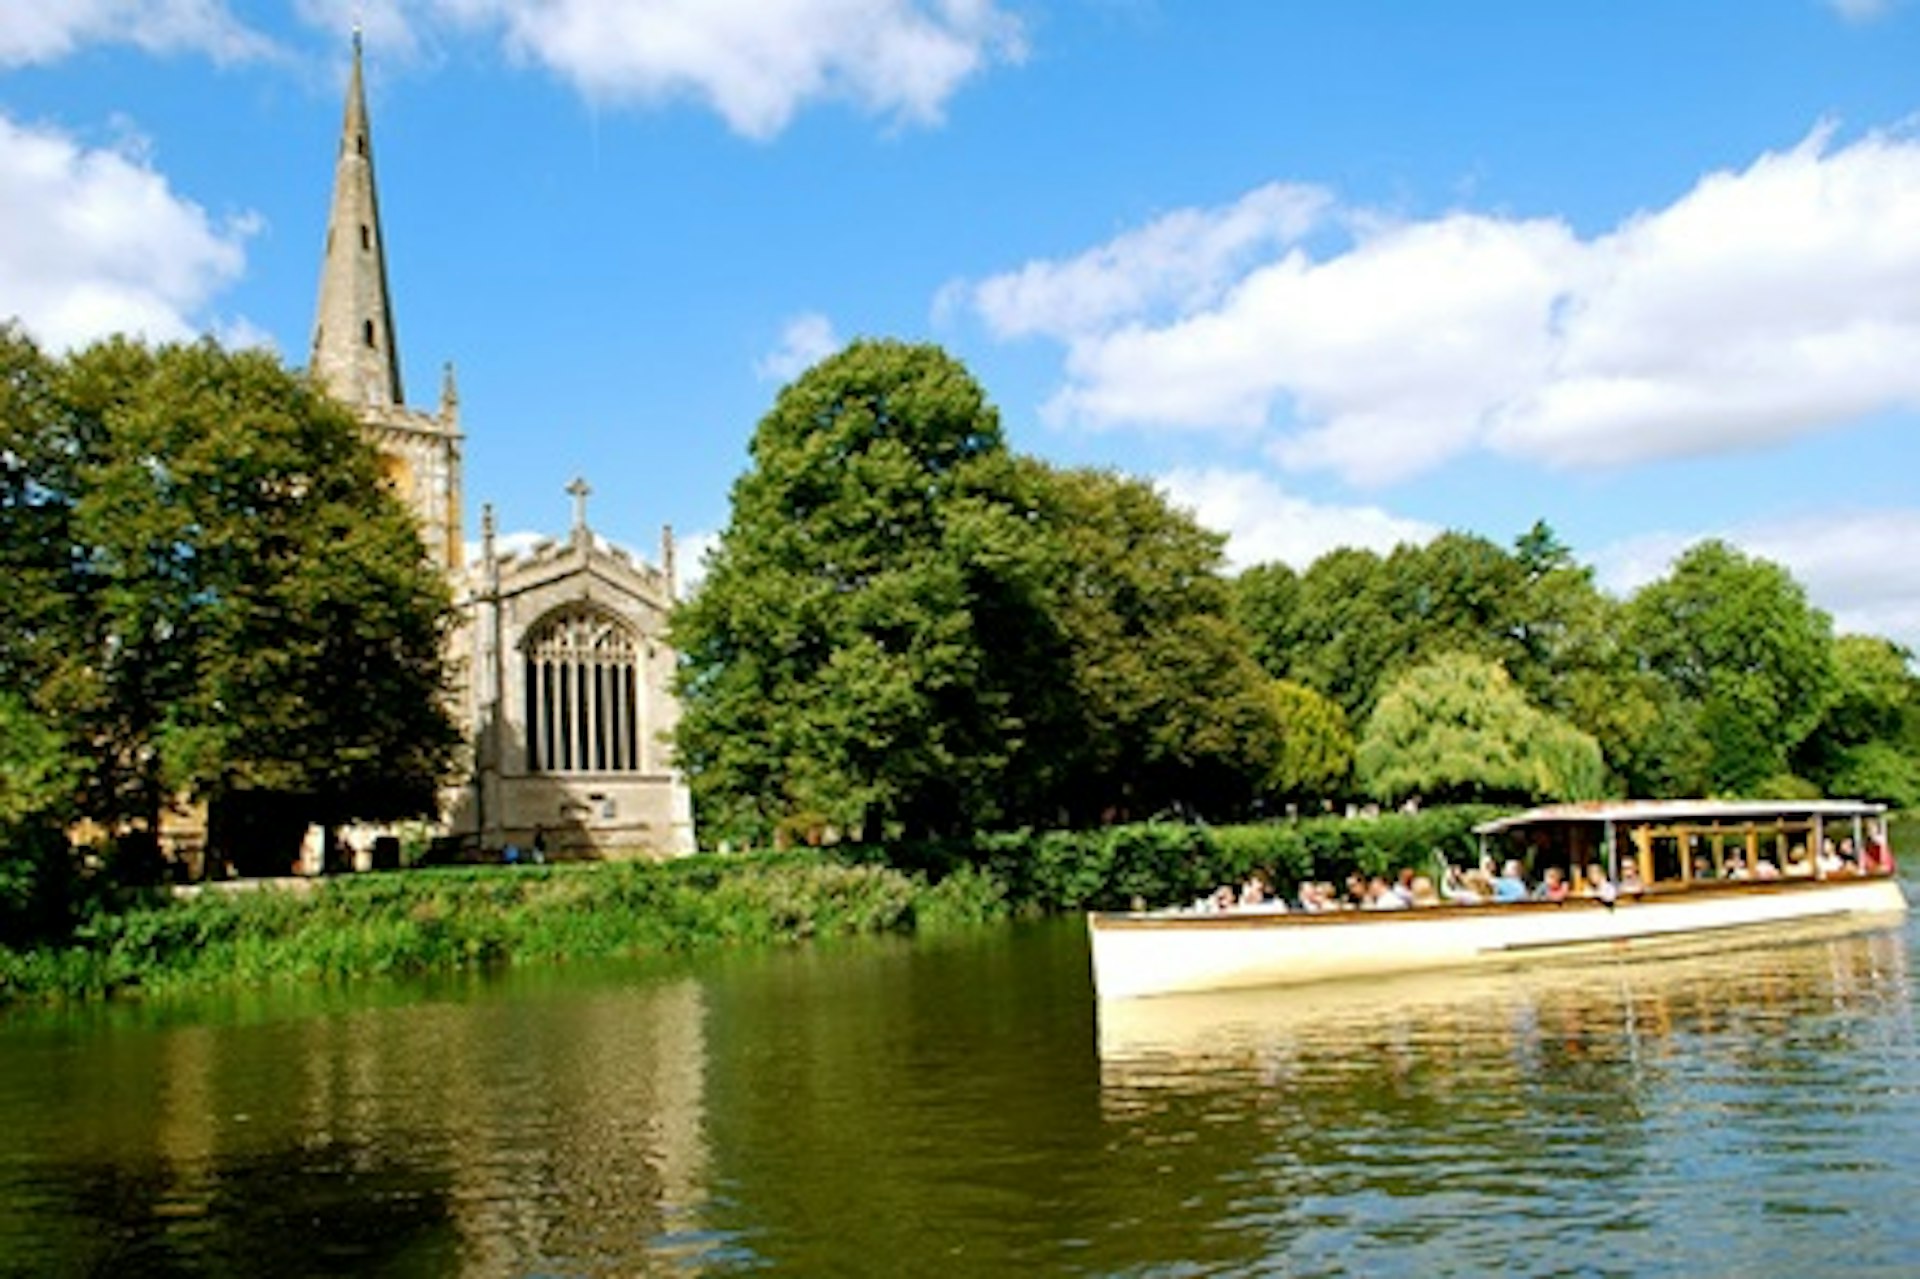 Afternoon Tea and River Sightseeing Cruise for Two in Historic Stratford Upon Avon 1